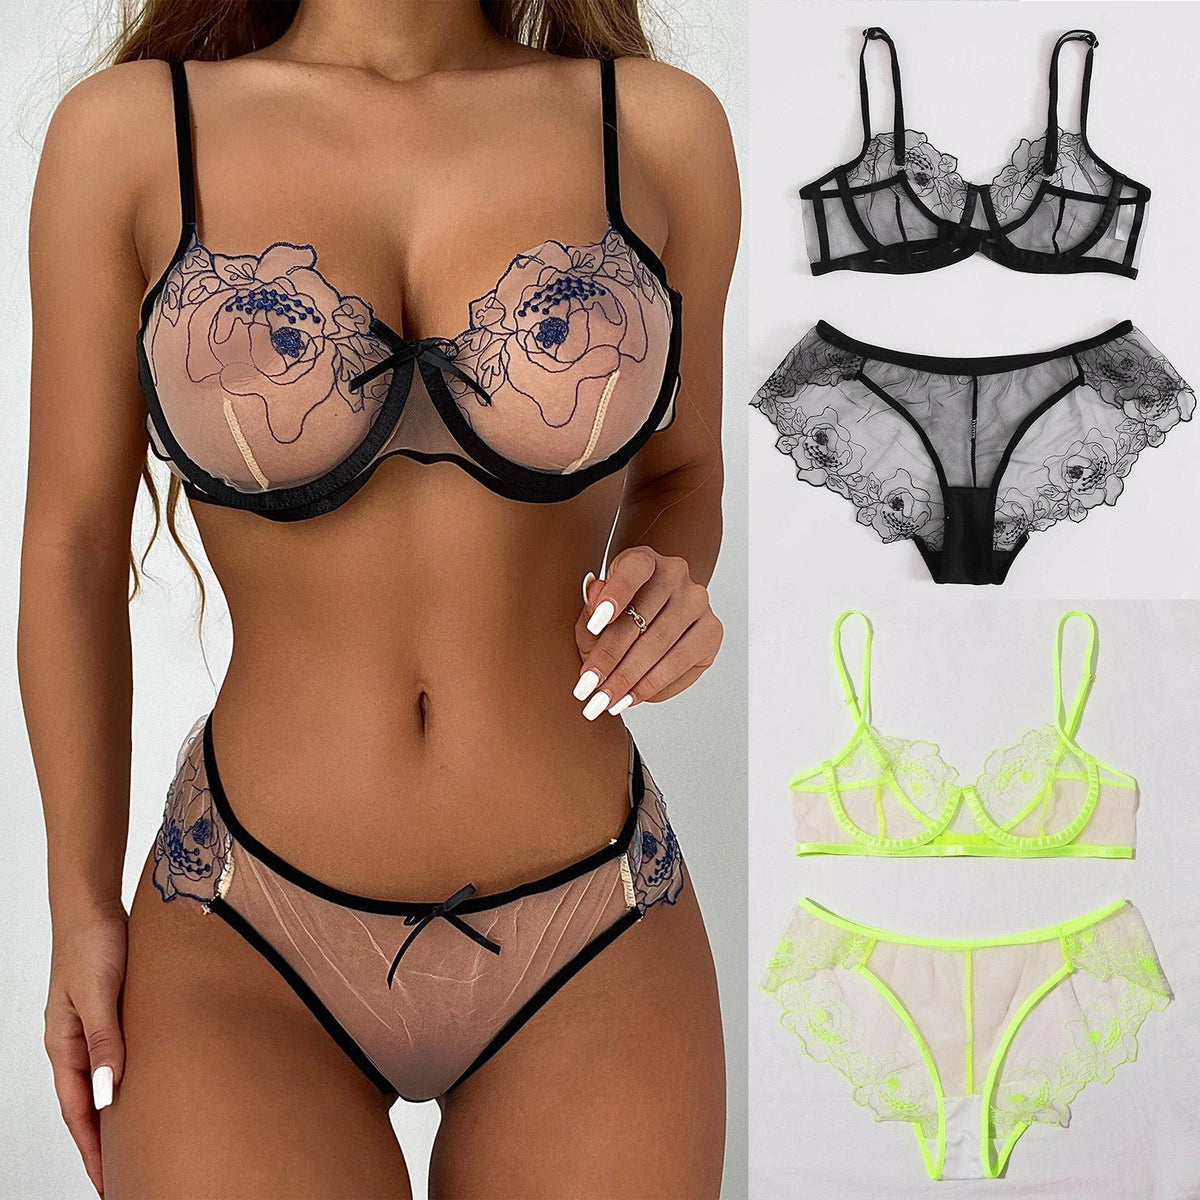 Delicate Embroidery Ensemble Sheer Lingerie Set.-Bras and Briefs-StylinArts